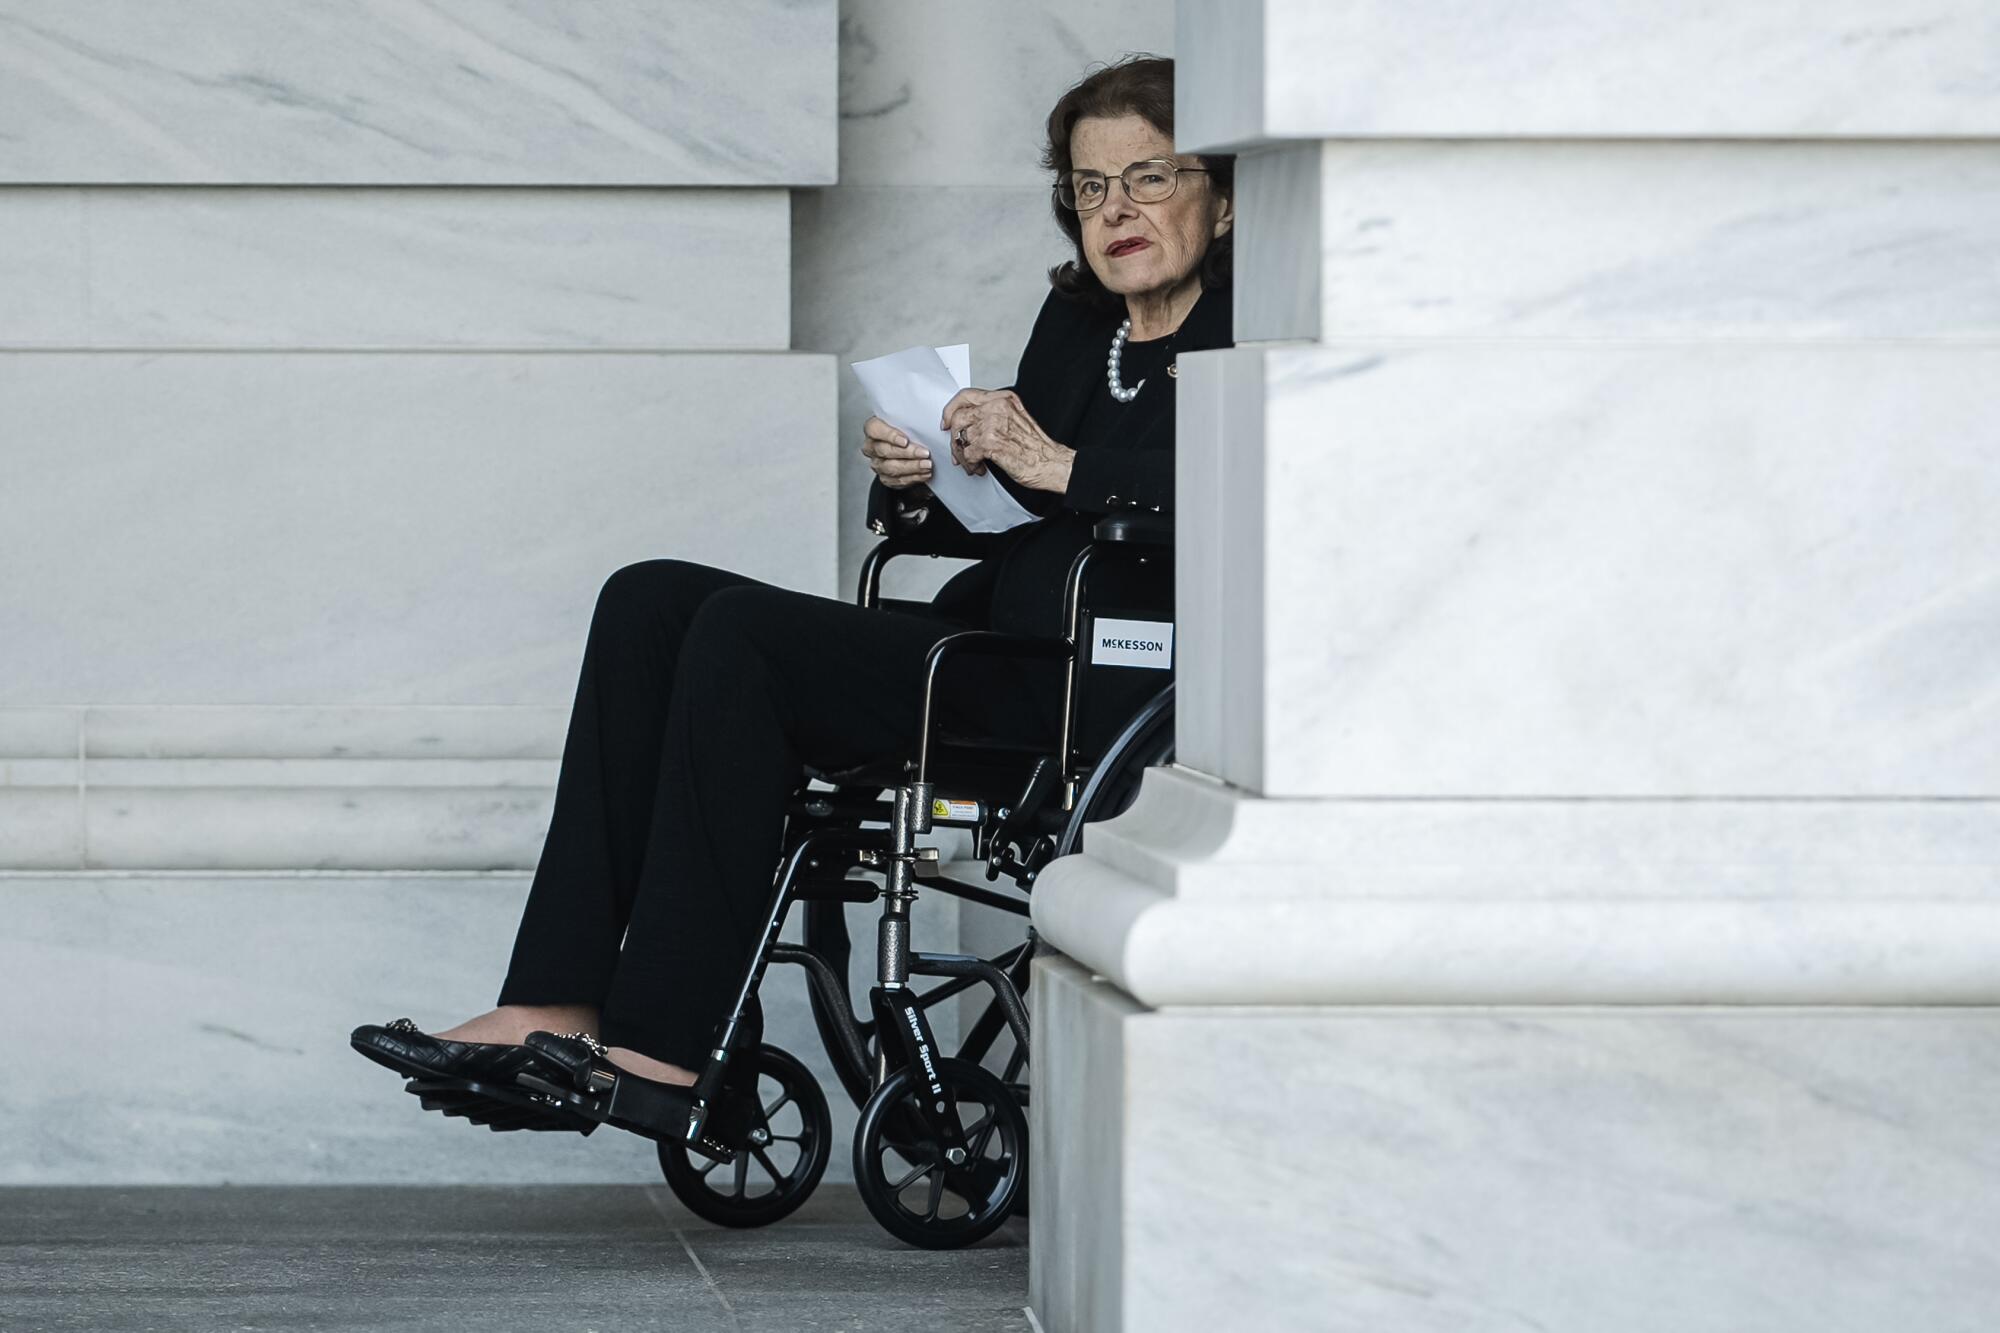 A person in a wheelchair appears behind a marble column.